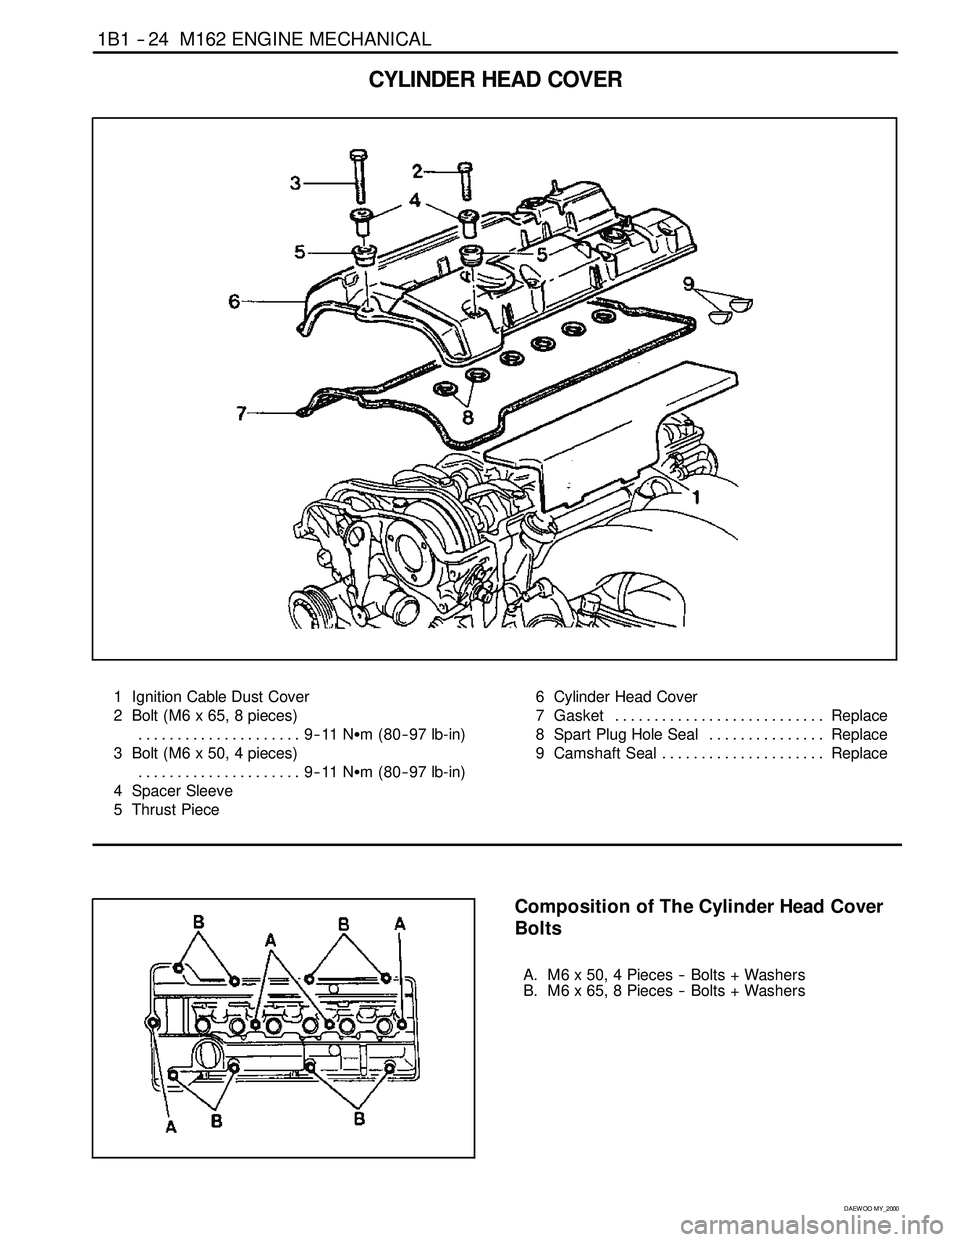 SSANGYONG KORANDO 1997  Service Repair Manual 1B1 -- 24 M162 ENGINE MECHANICAL
D AEW OO M Y_2000
CYLINDER HEAD COVER
1 Ignition Cable Dust Cover
2 Bolt (M6 x 65, 8 pieces)
9--11 NSm (80-- 97 lb-in) .....................
3 Bolt (M6 x 50, 4 pieces)